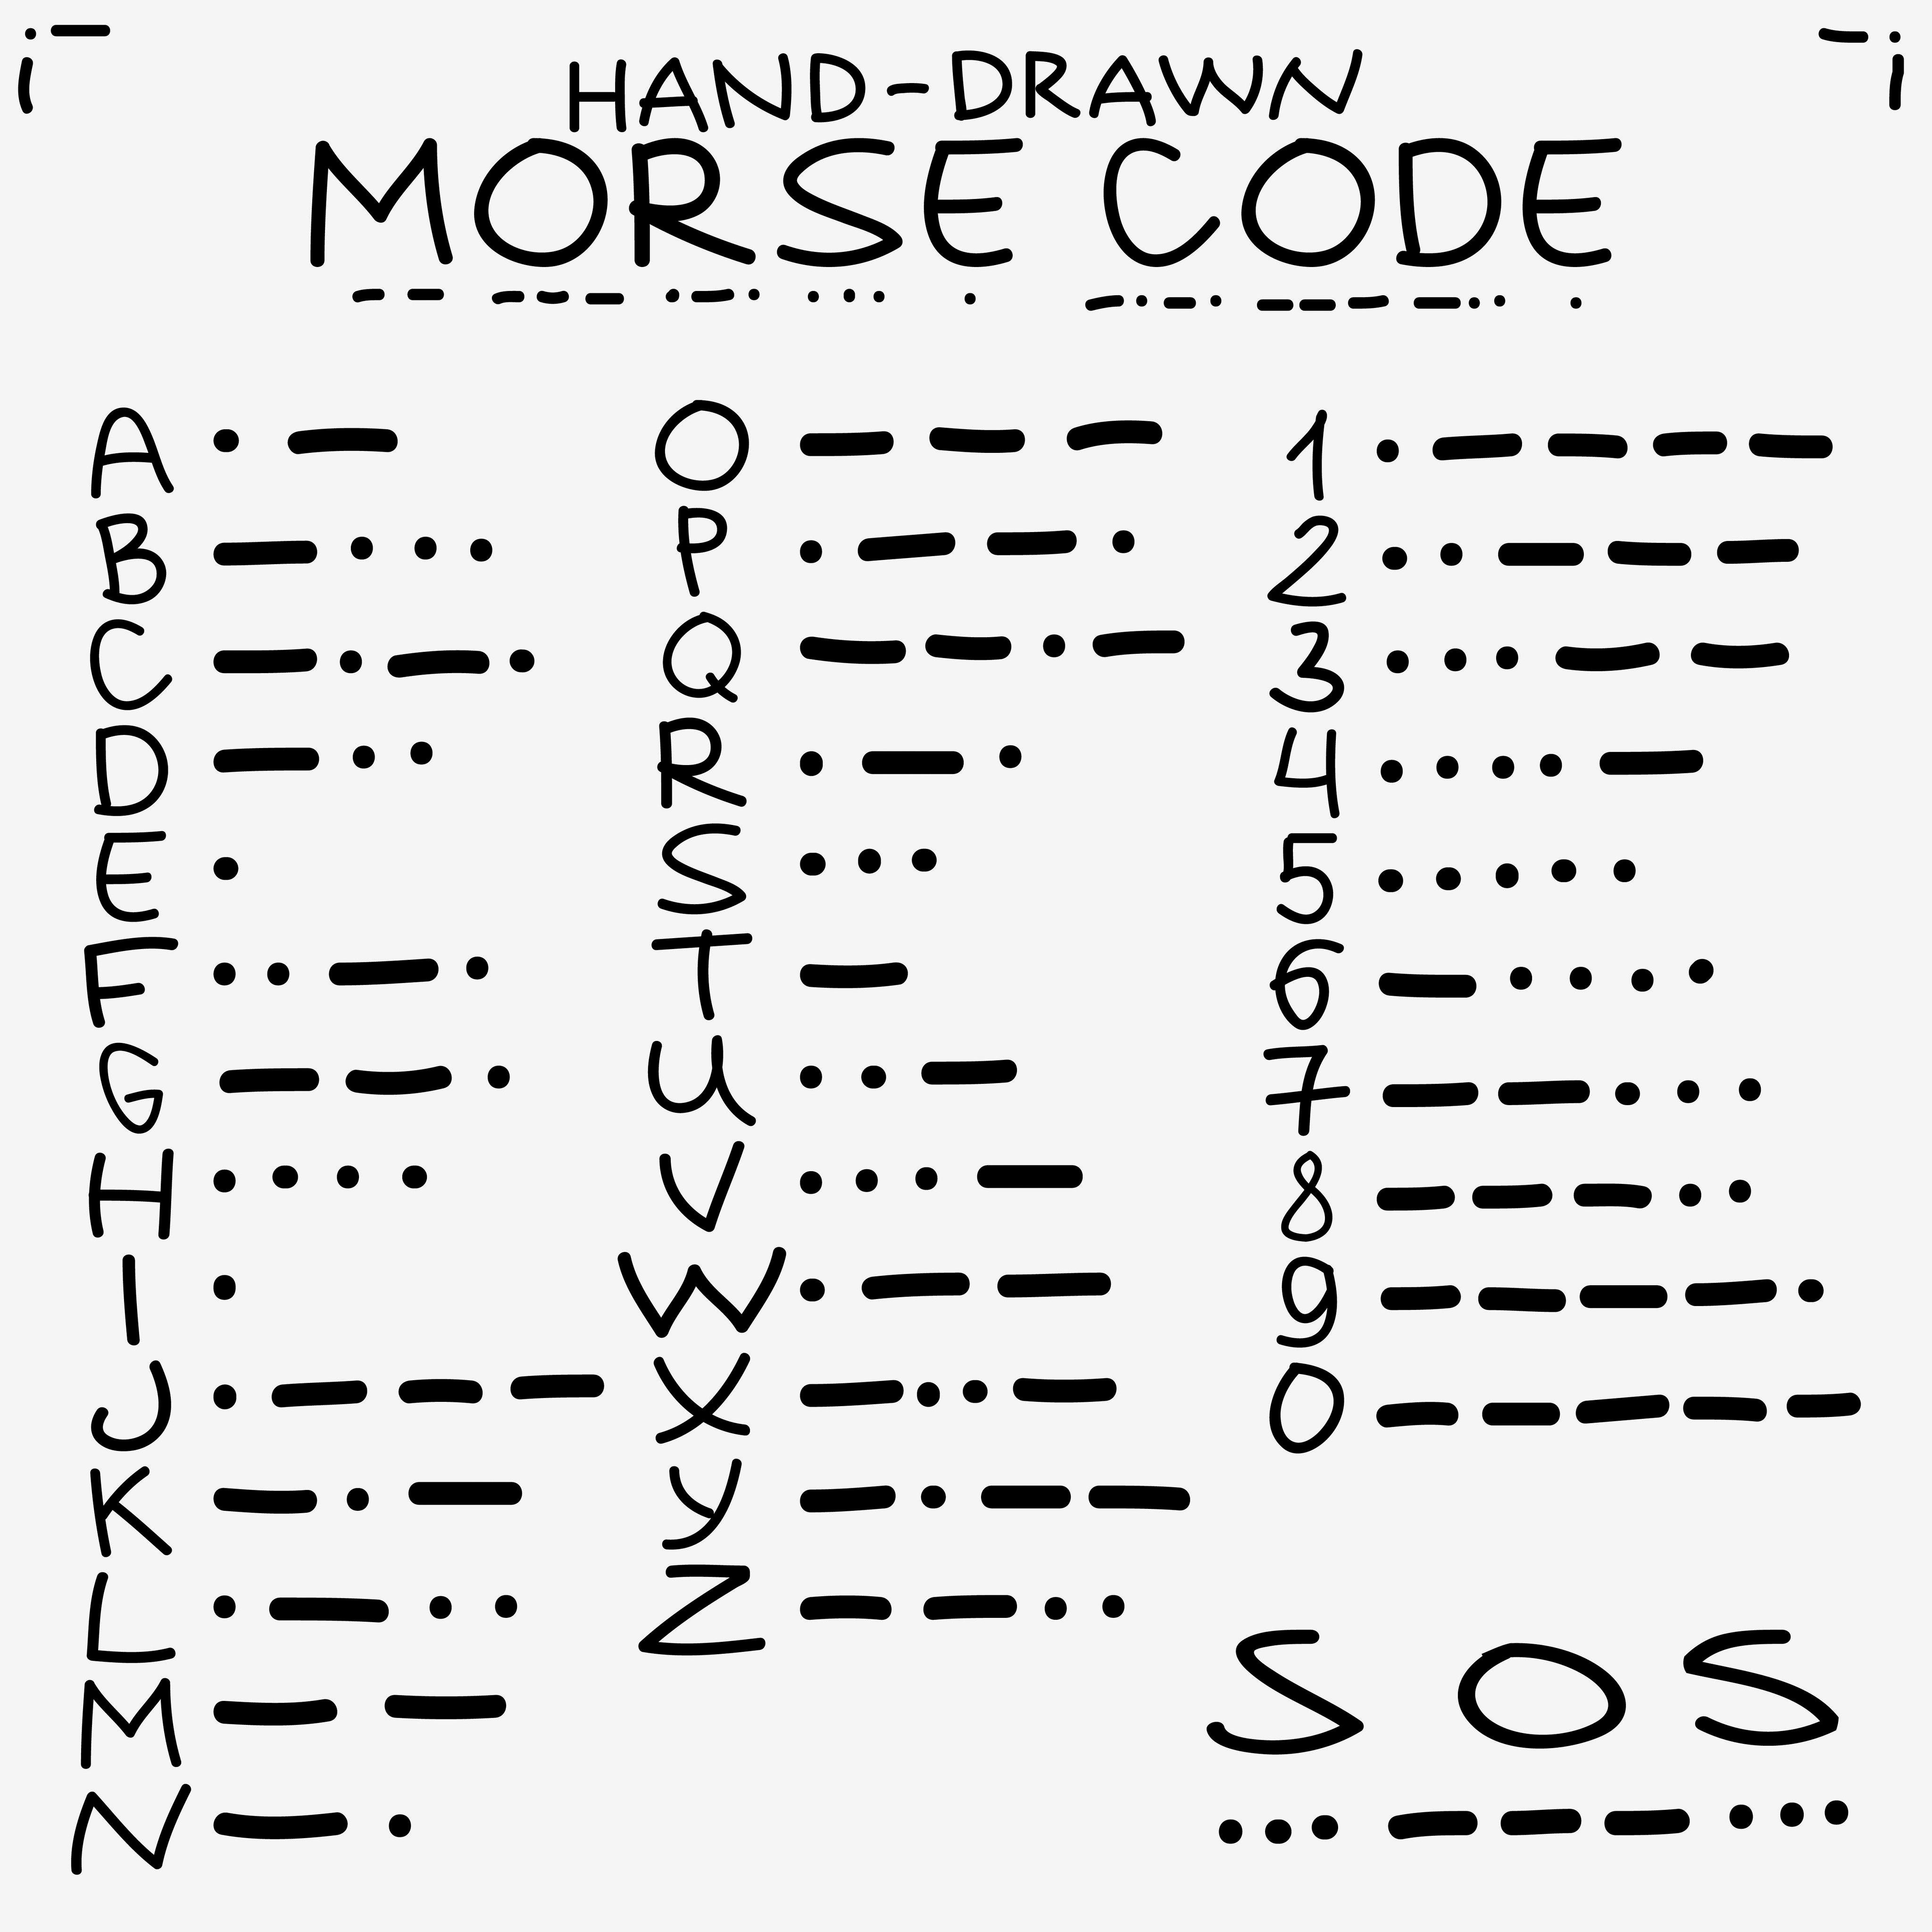 How to Signal for Help Using Morse Code